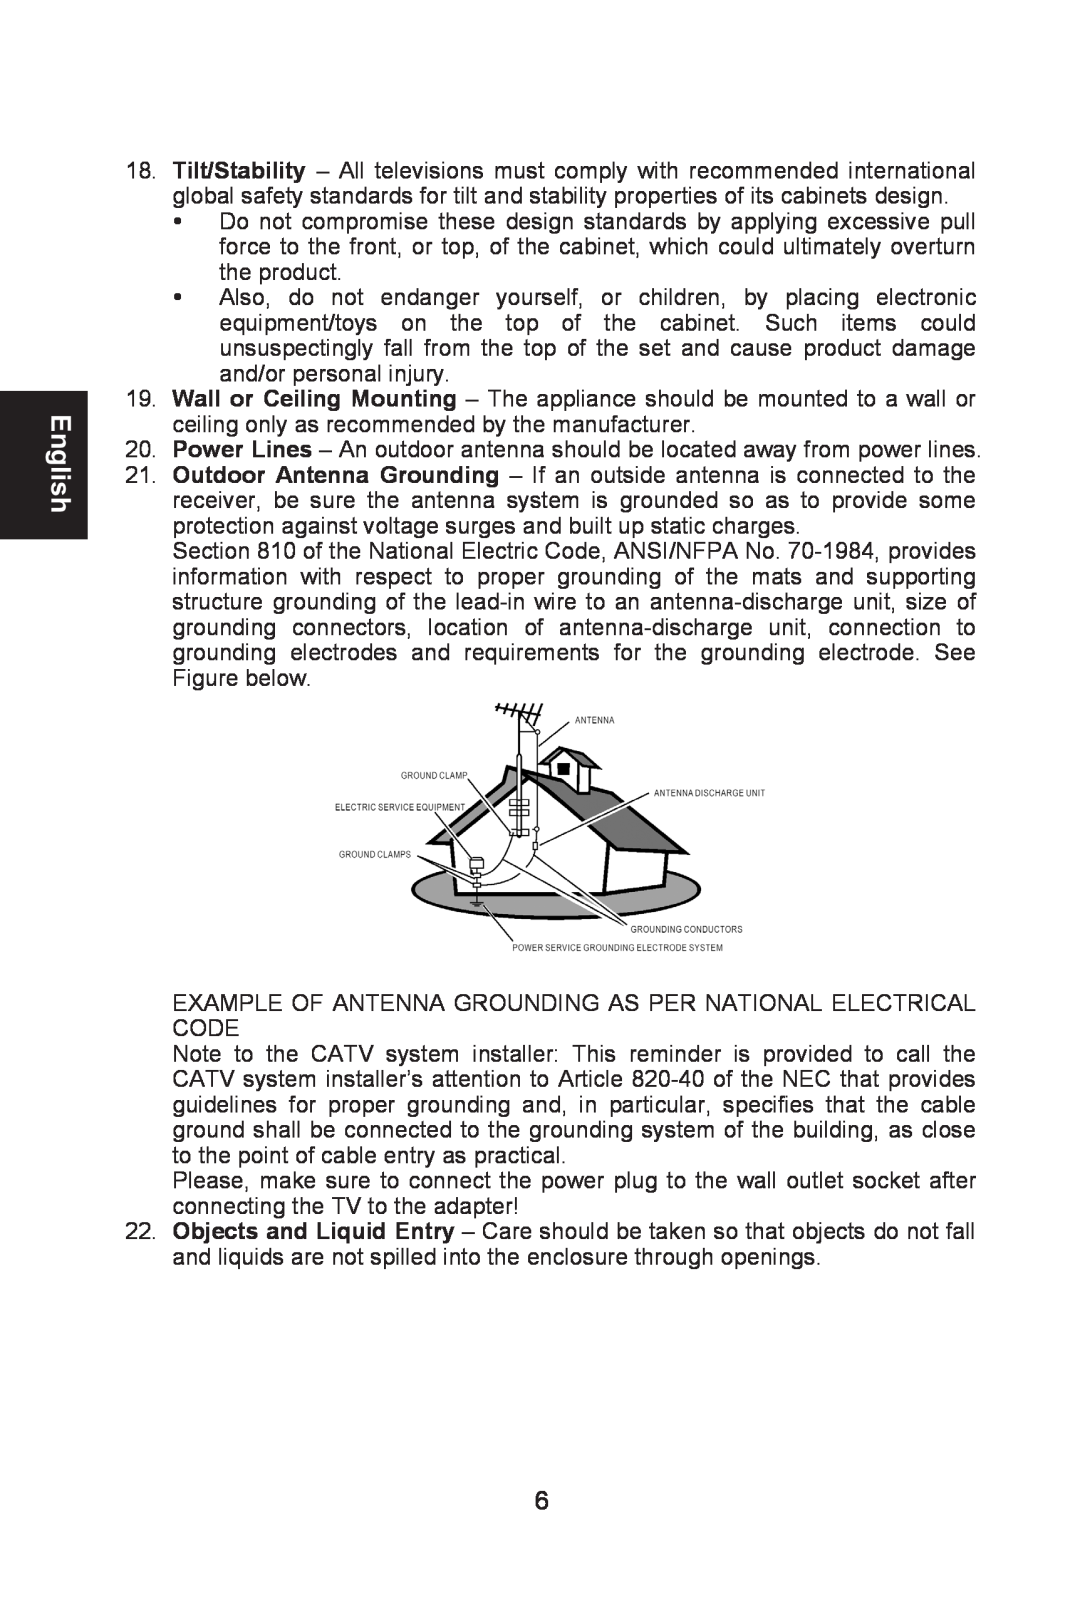 AOC L26W661 user manual English, Example Of Antenna Grounding As Per National Electrical Code 